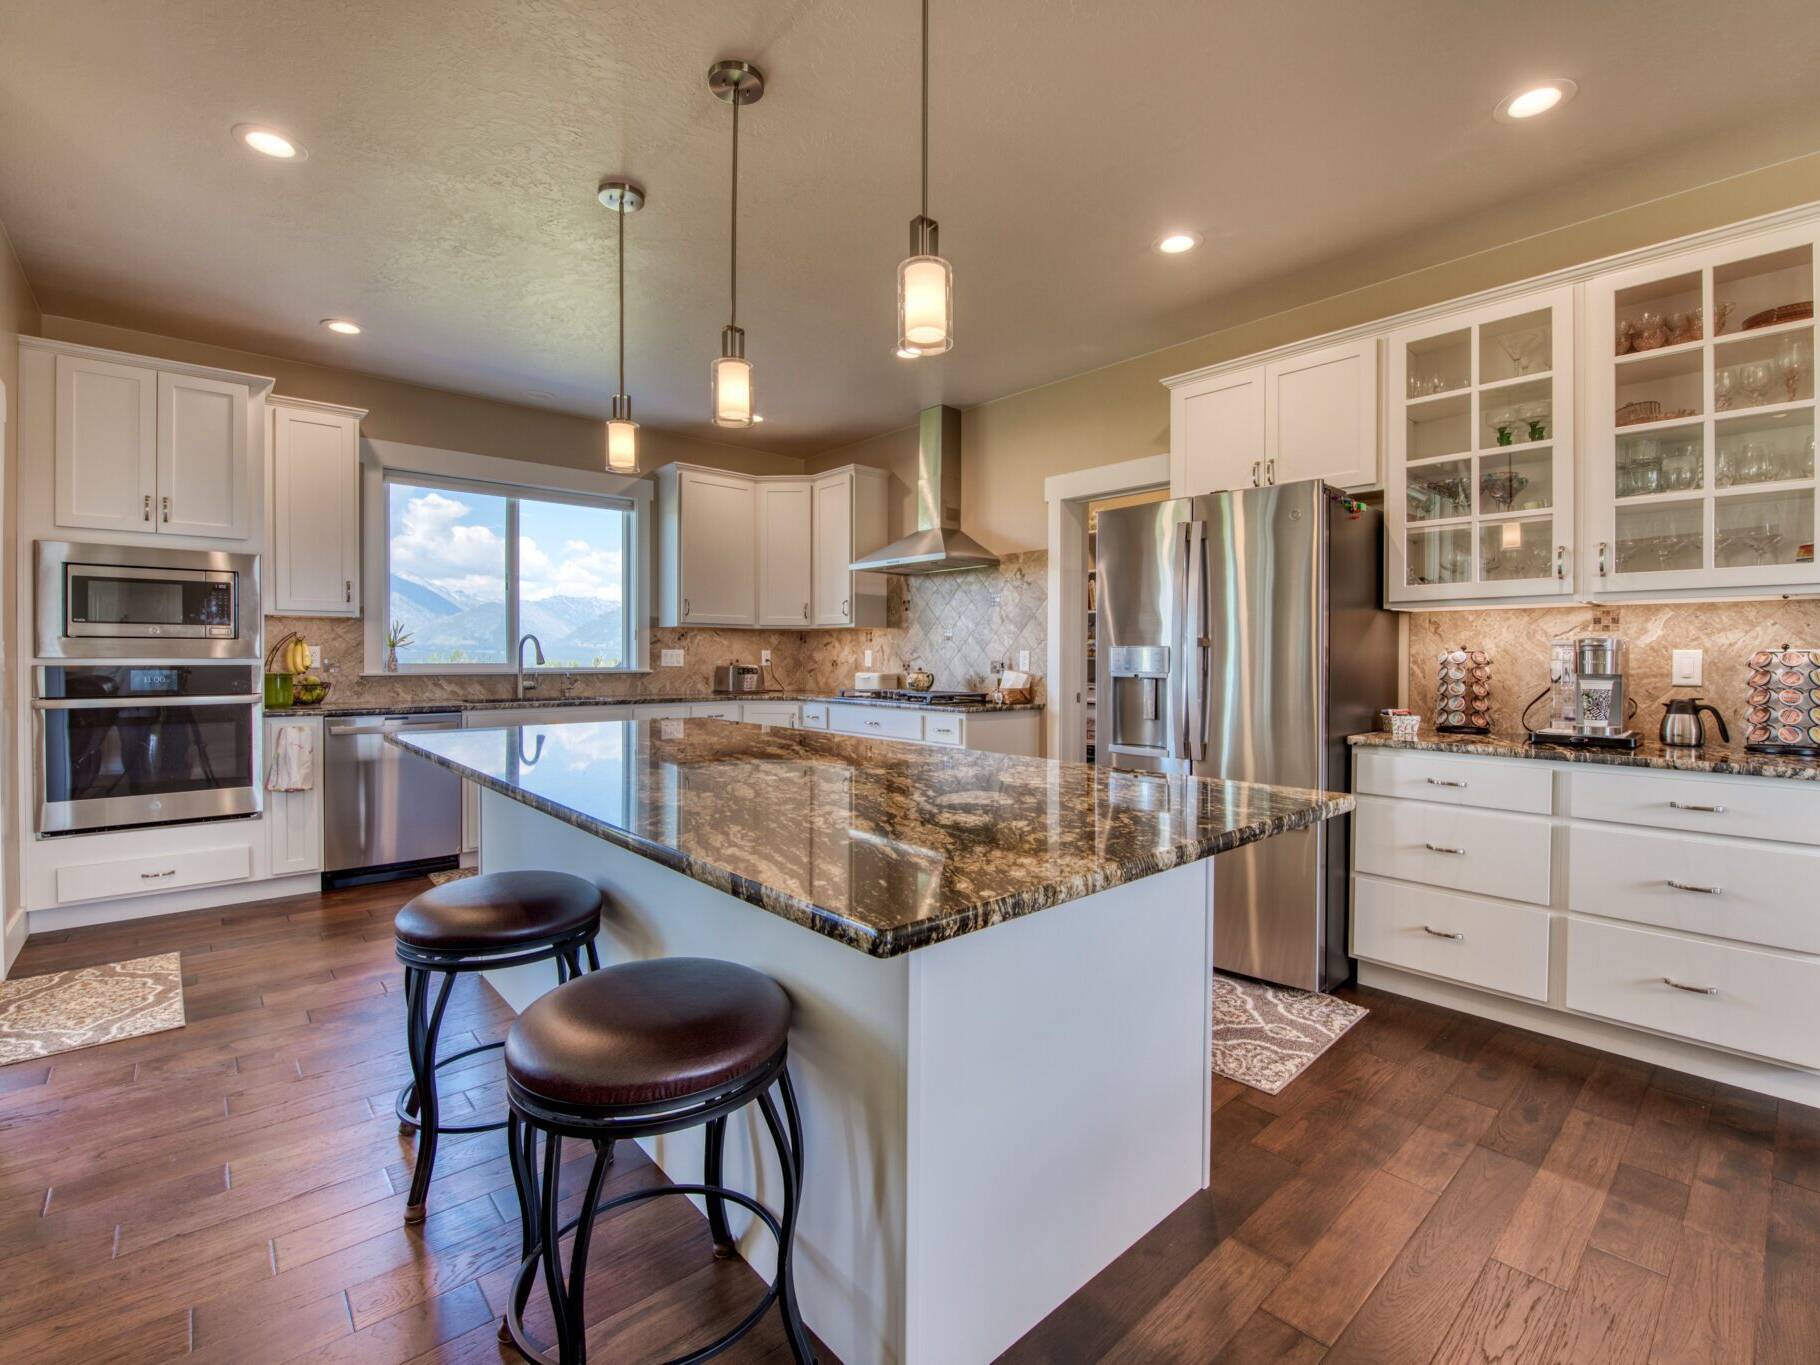 Kitchen with island, granite countertops, tile backsplash, and wood flooring in a custom home built by Big Sky Builders of Montana in Hamilton, MT